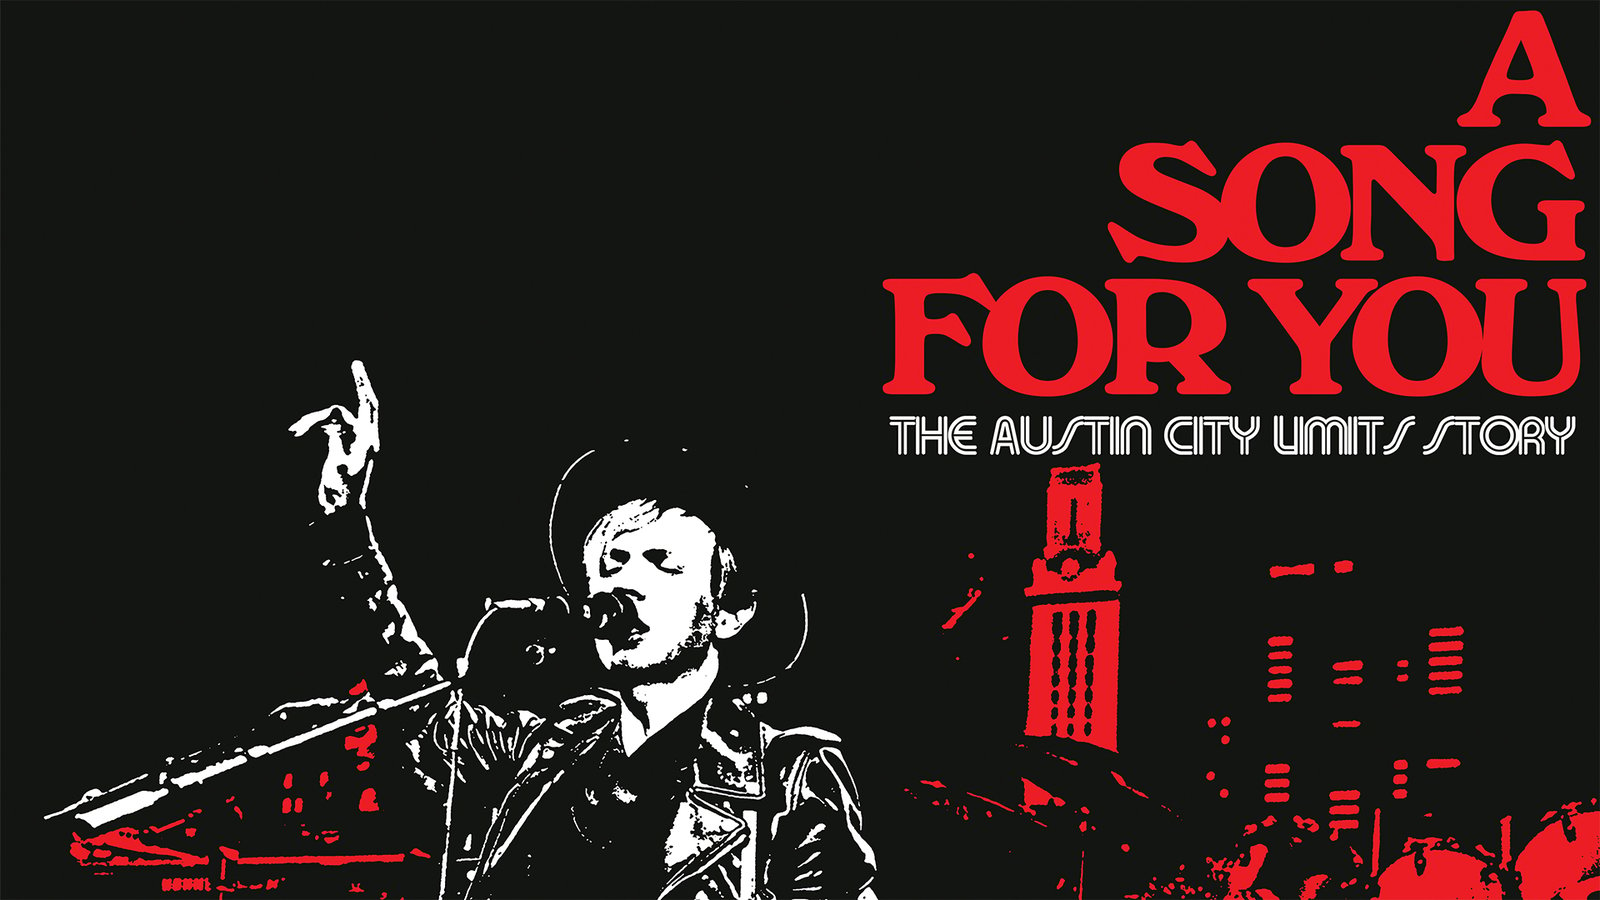 A Song For You - The Austin City Limits Story